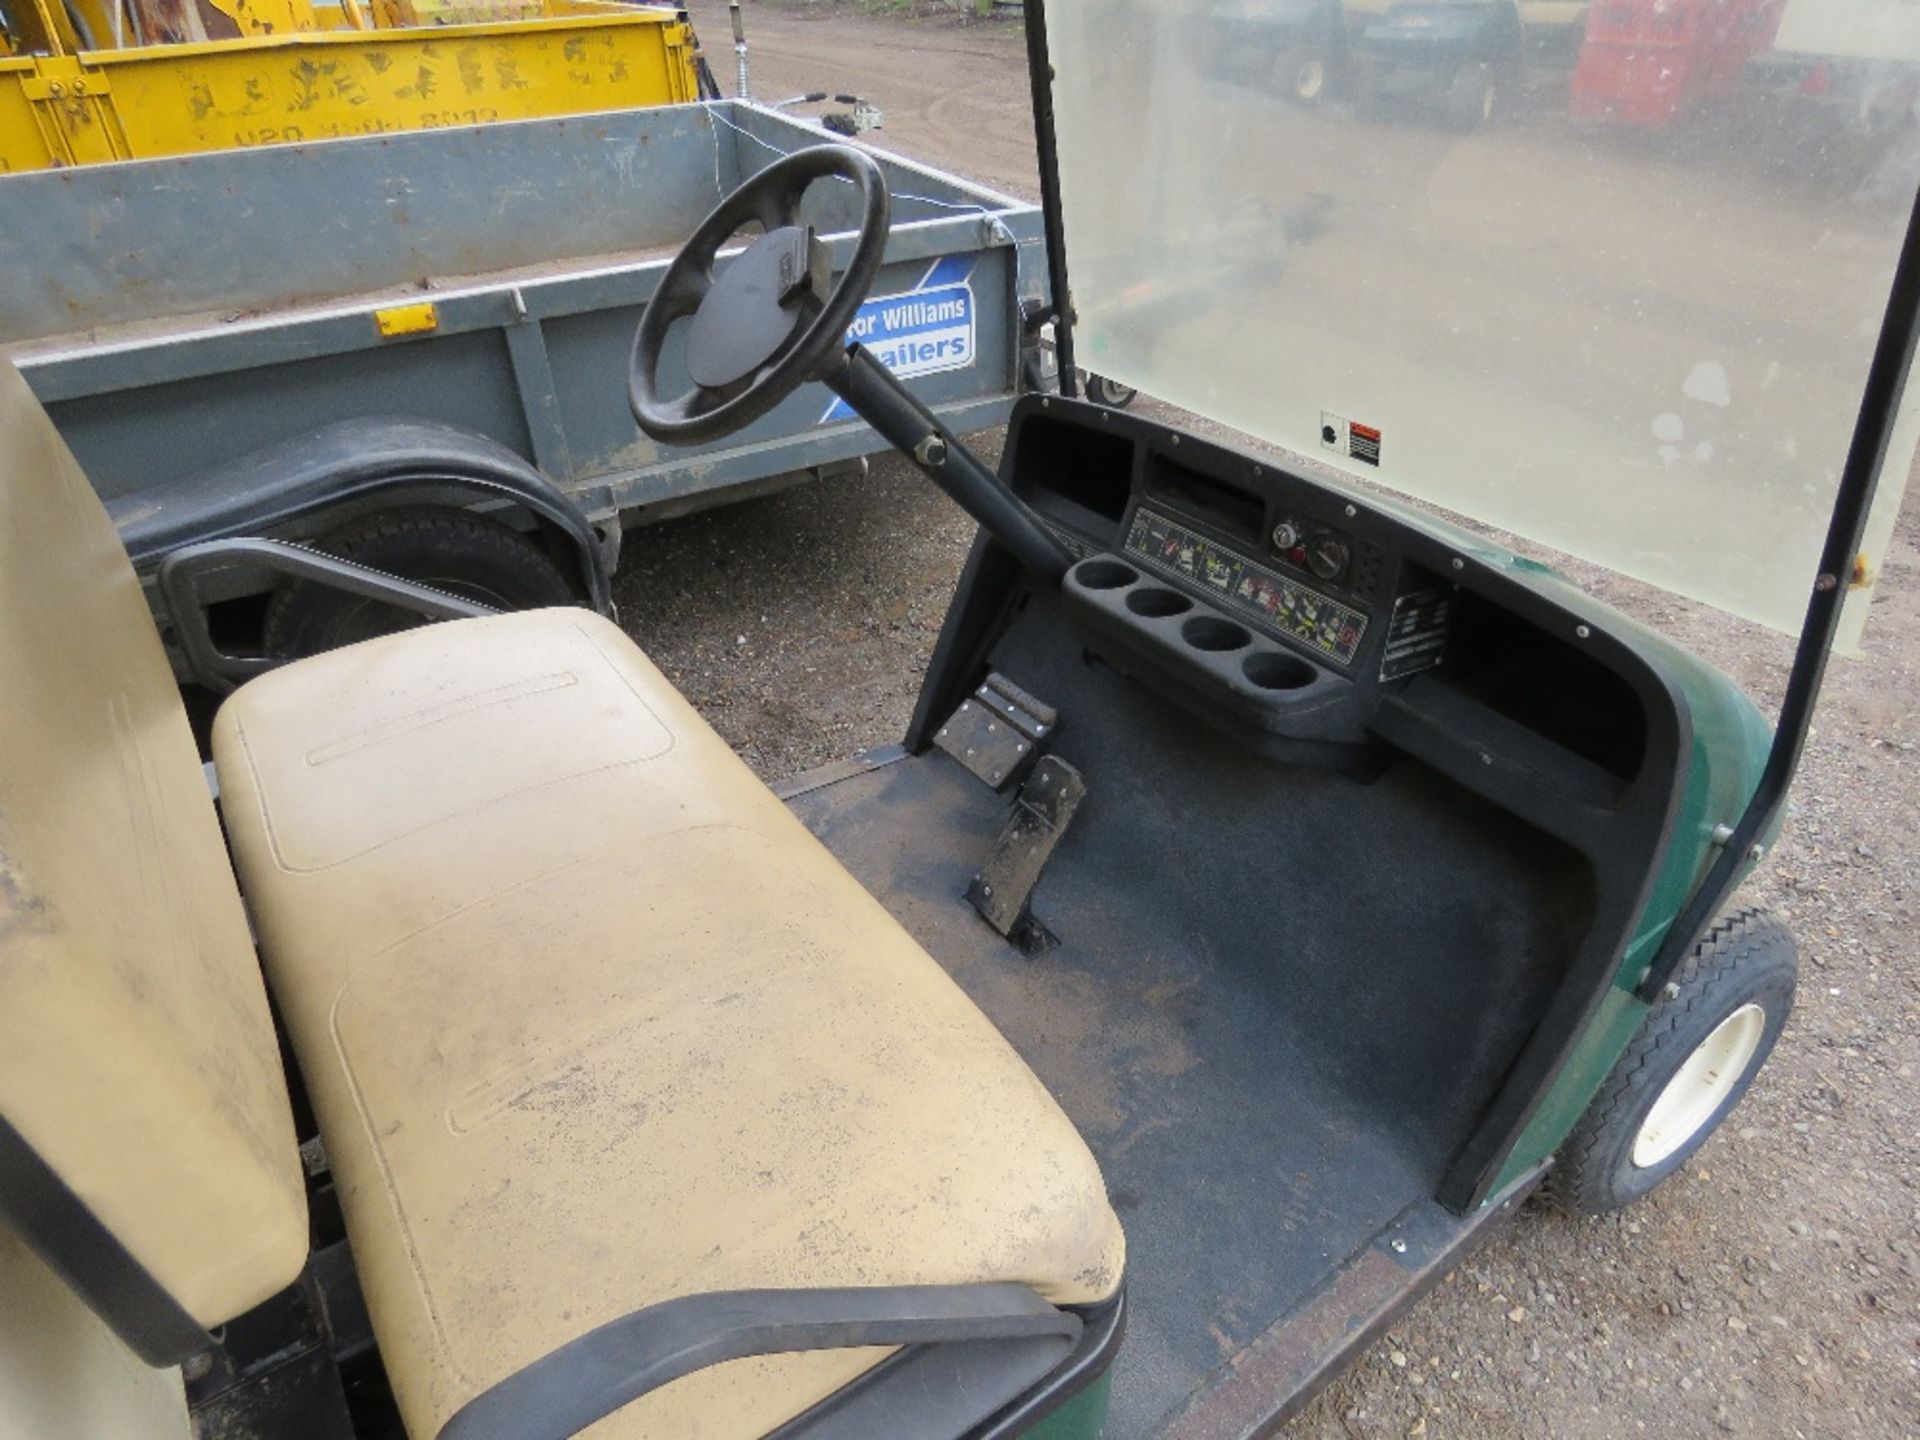 EZGO PETROL ENGINED GOLF BUGGY / CATERING TRUCK. DIRECT FROM FISHING LAKES WHO NO LONGER PROVIDE CAT - Image 14 of 20